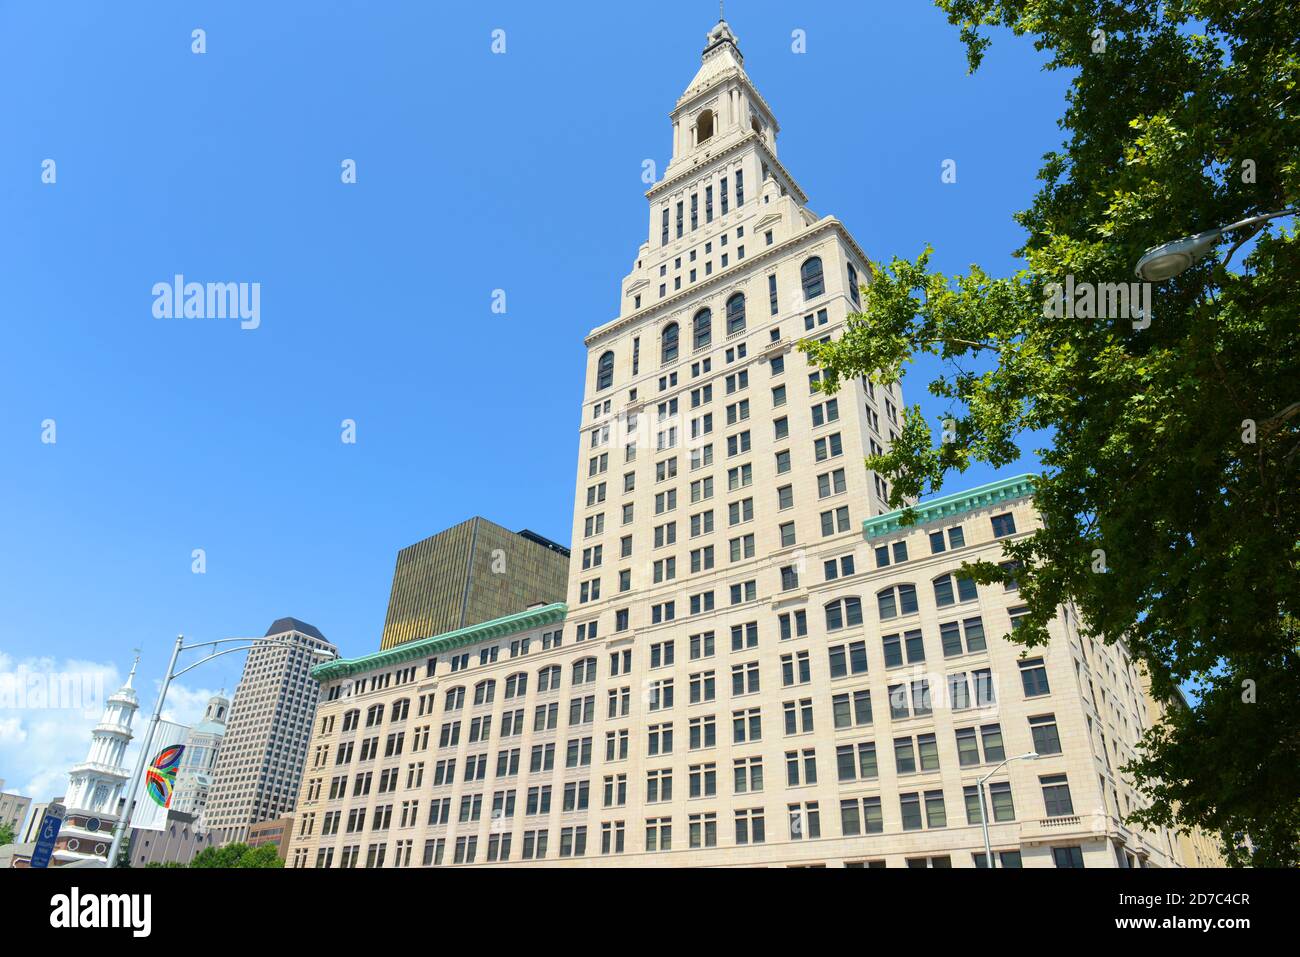 Hartford modern city skyline including Travelers Tower and Wadsworth Atheneum Museum of Art in downtown Hartford, Connecticut, USA. Stock Photo